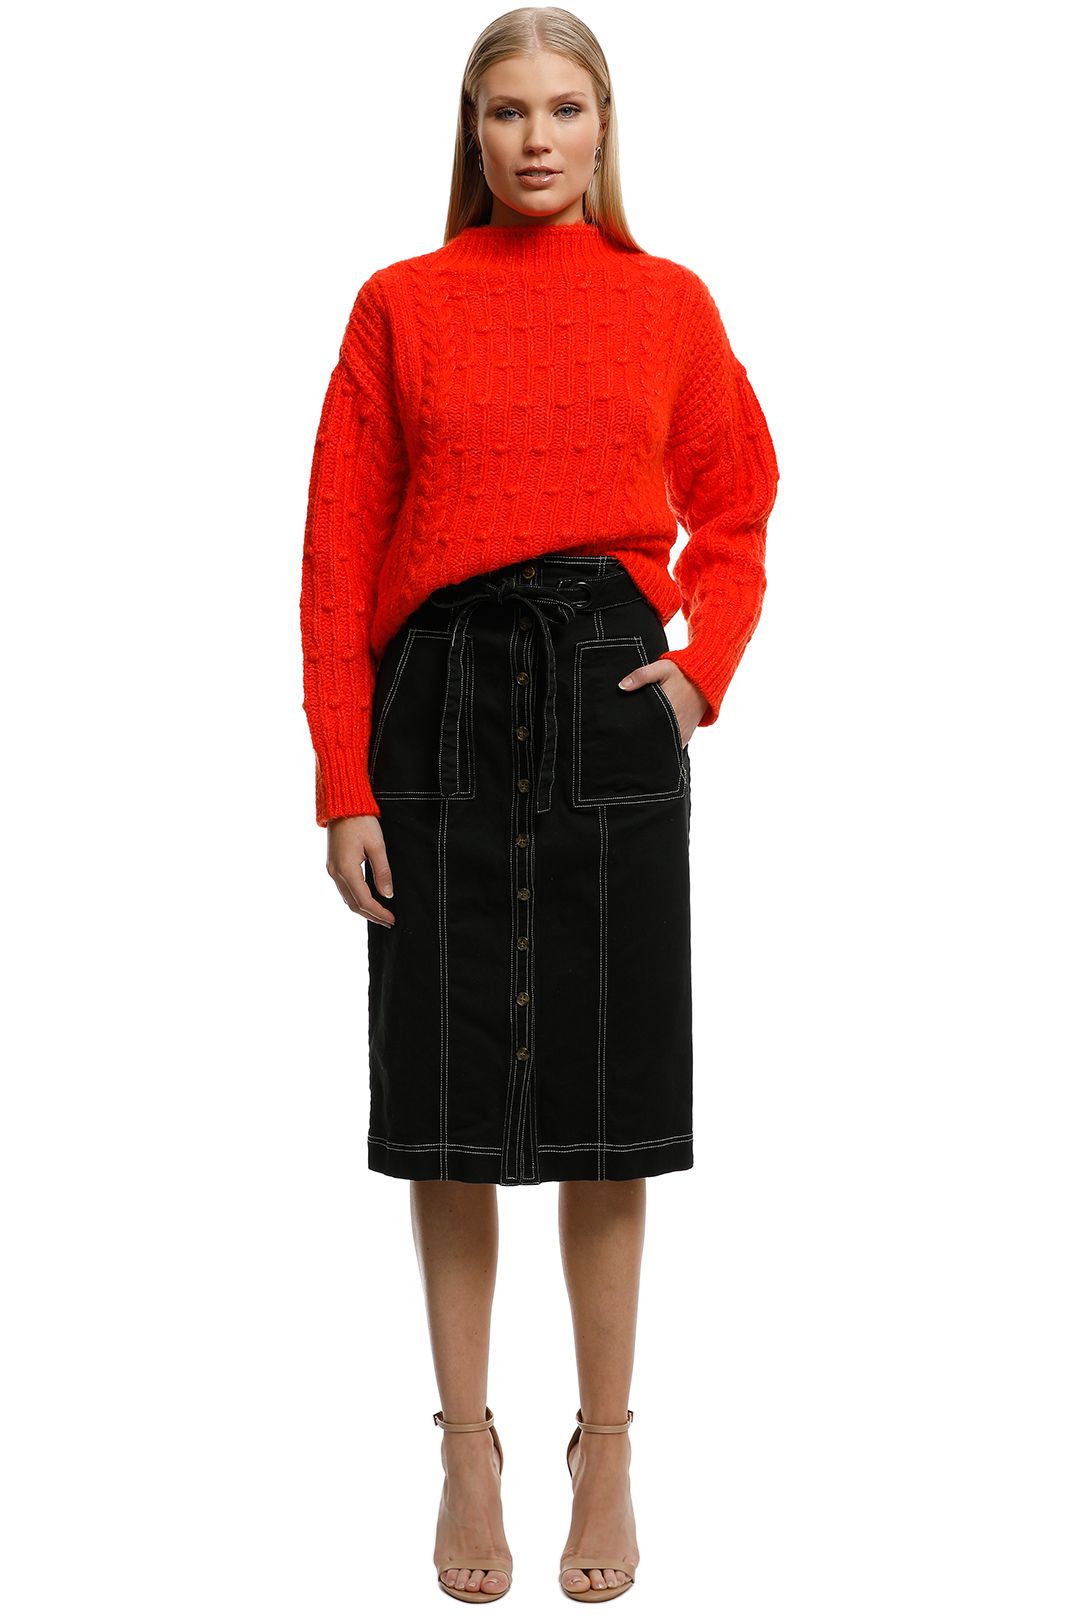 MNG - Contrasting Knit Sweater - Orange - Front